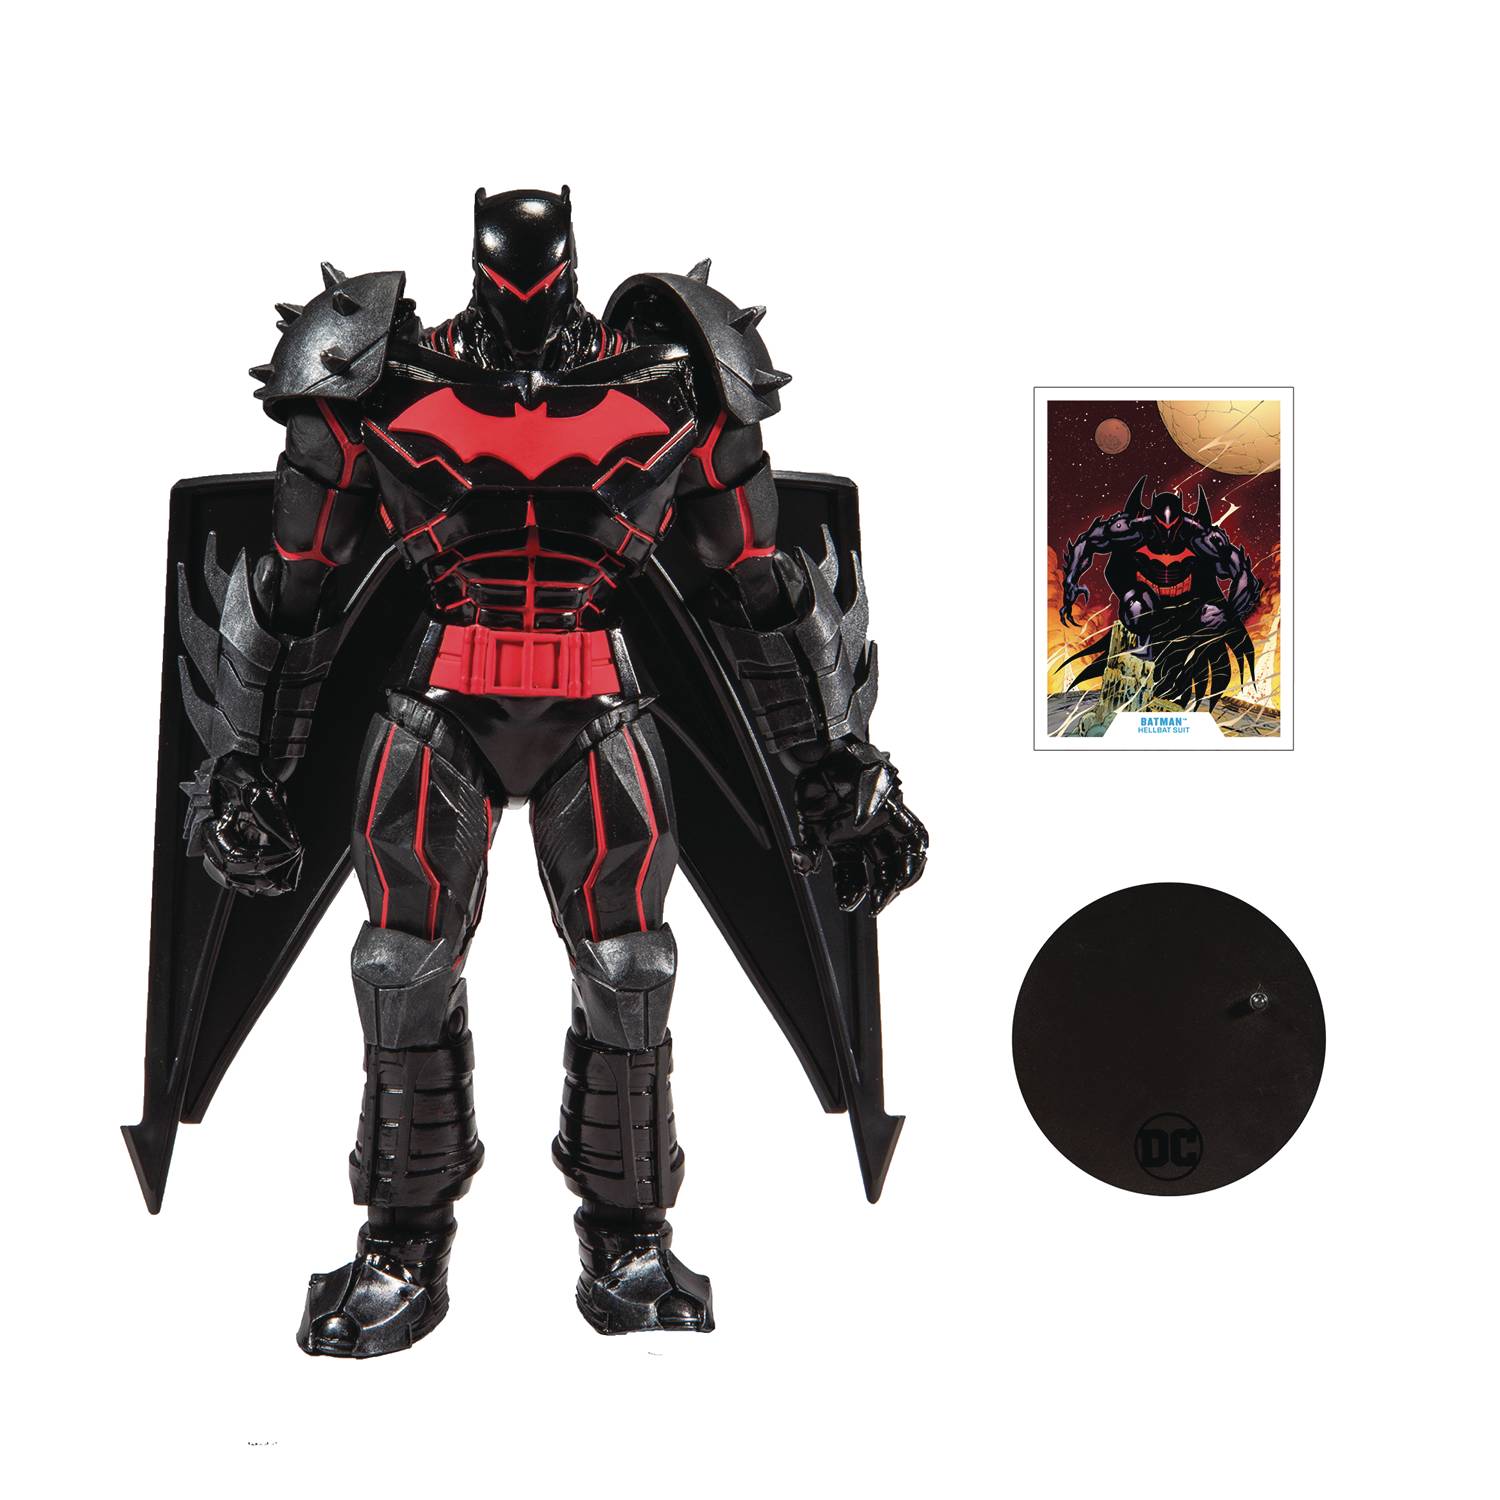 DC Armored Wave 1 Hellbat 7 Inch Scale Action Figure Case